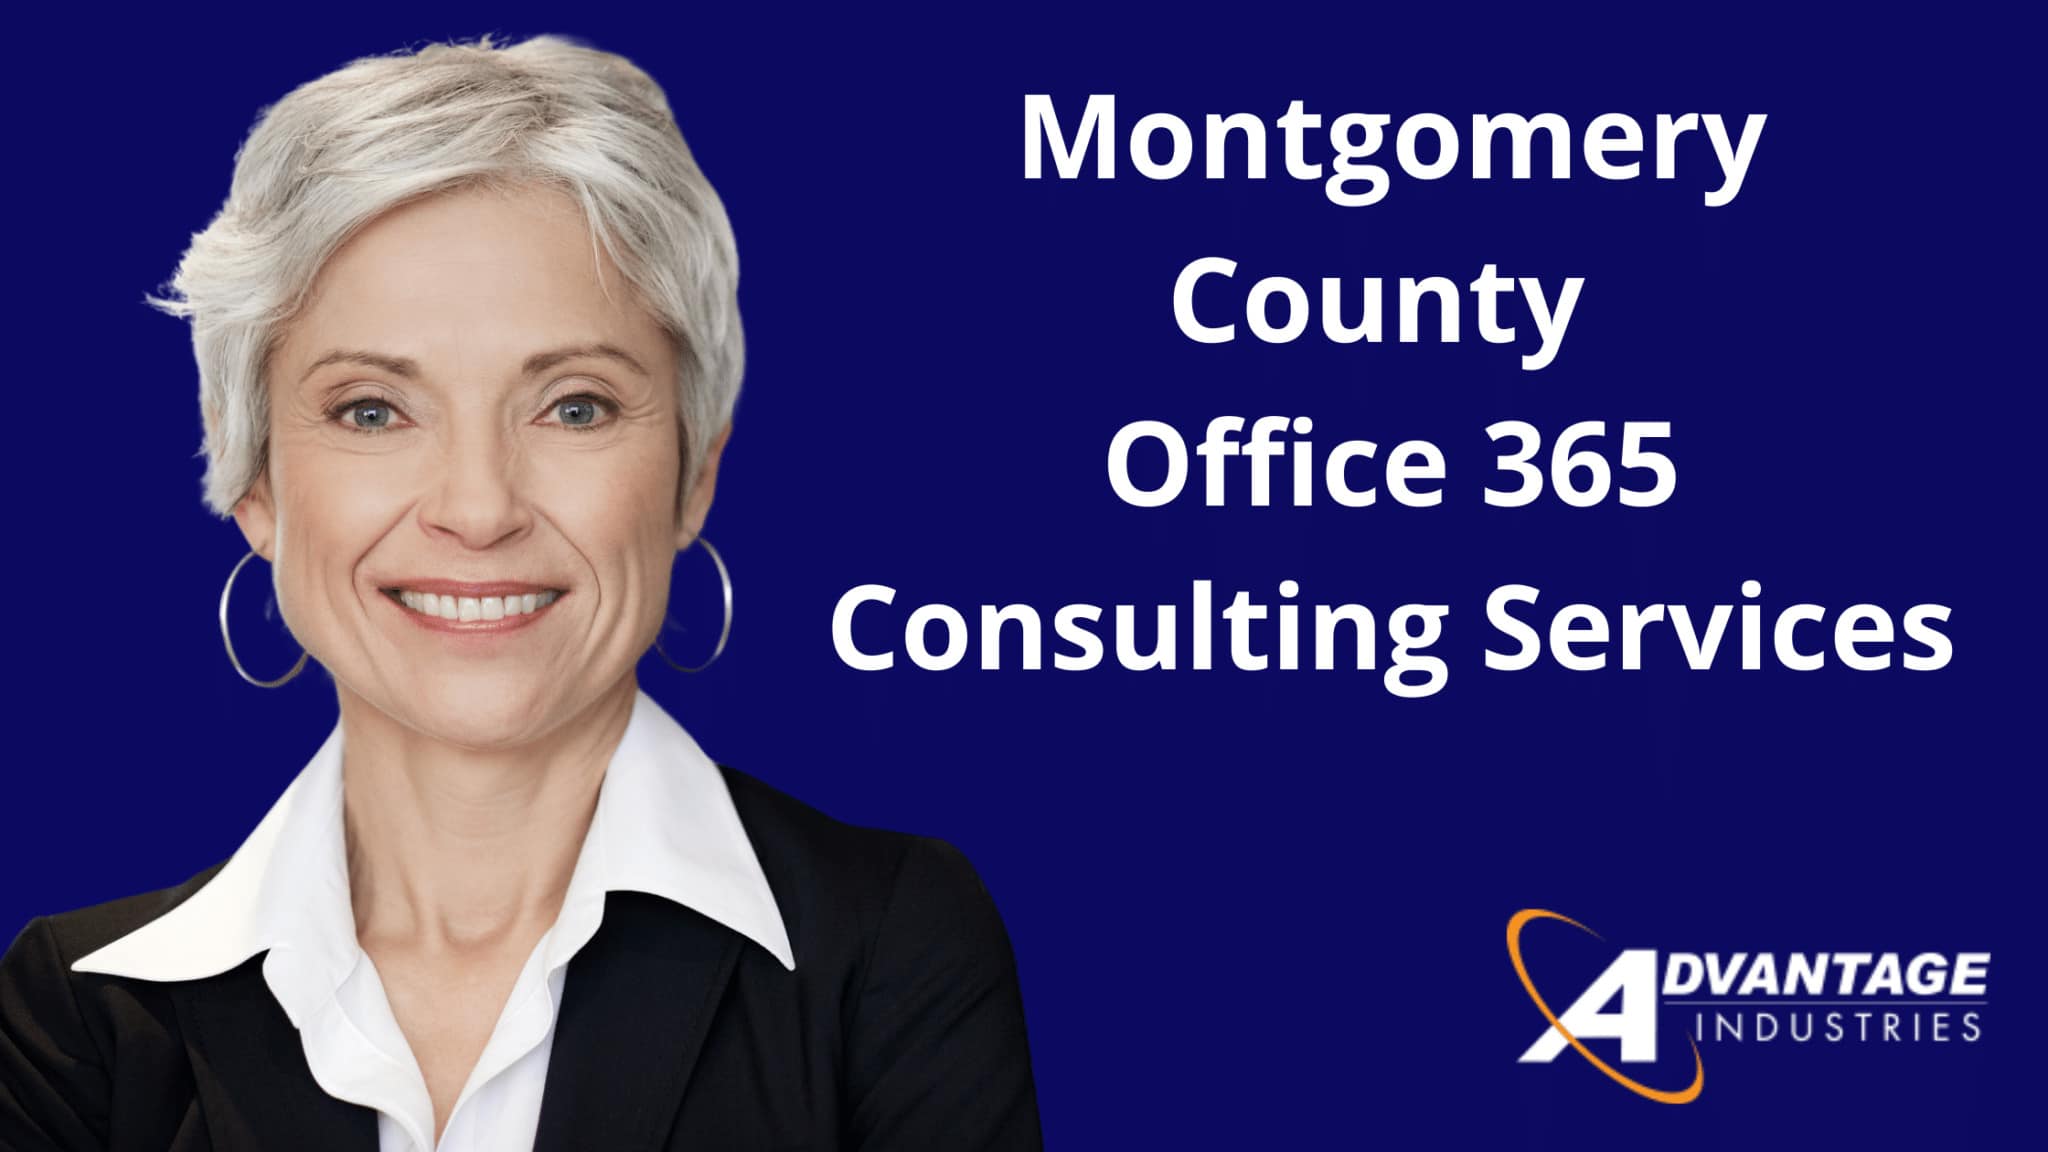 Montgomery County Office 365 Consulting Services